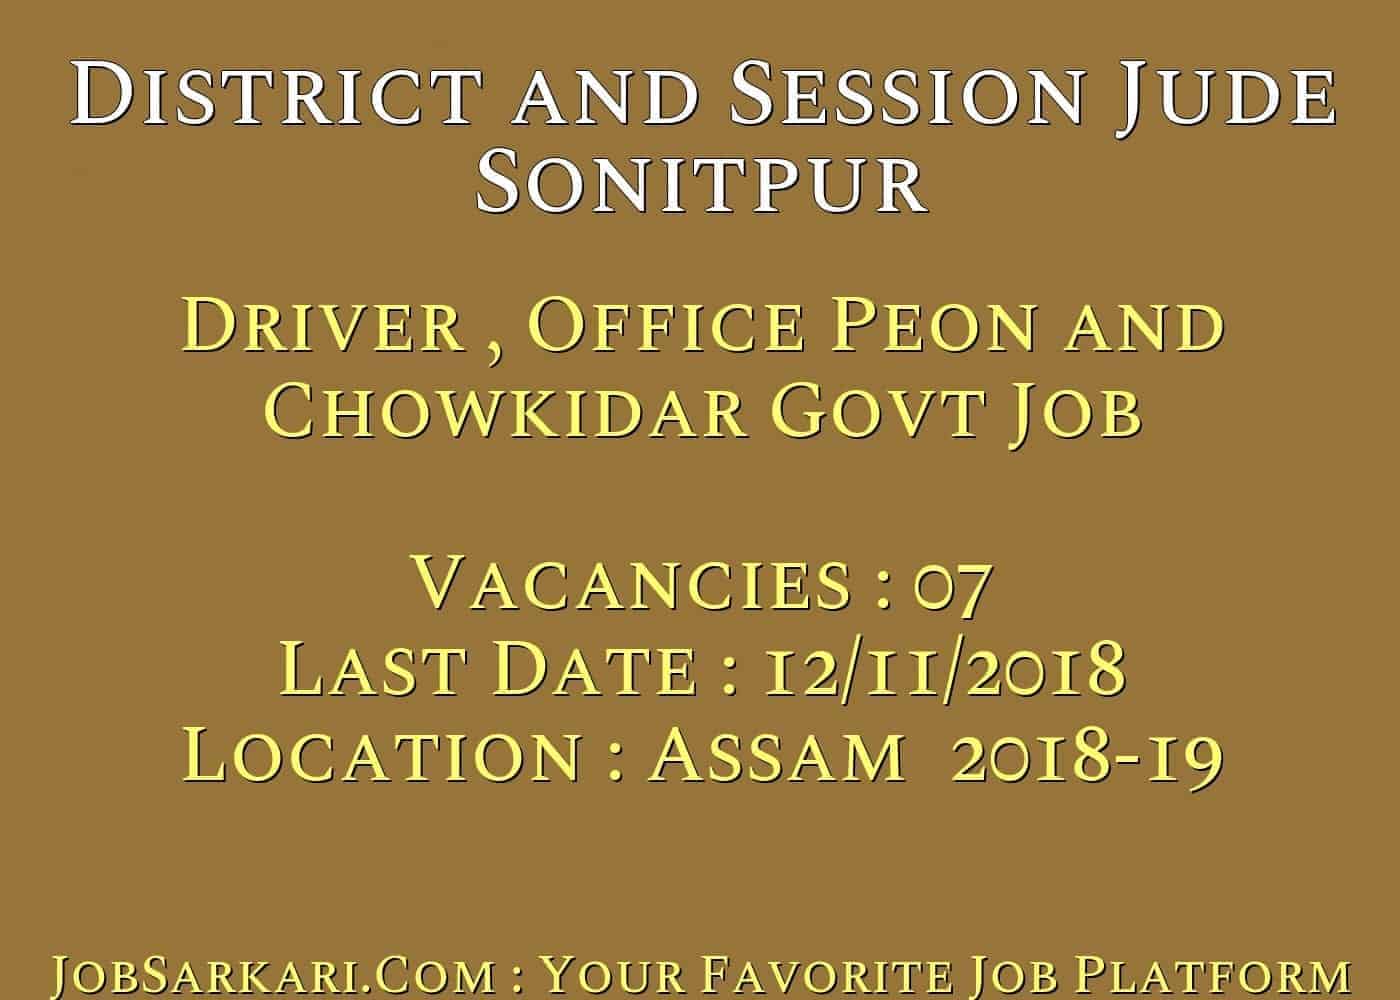 District And Session Judge Sonitpur Recruitment 2018 for Driver , Office Peon and Chowkidar Govt Job